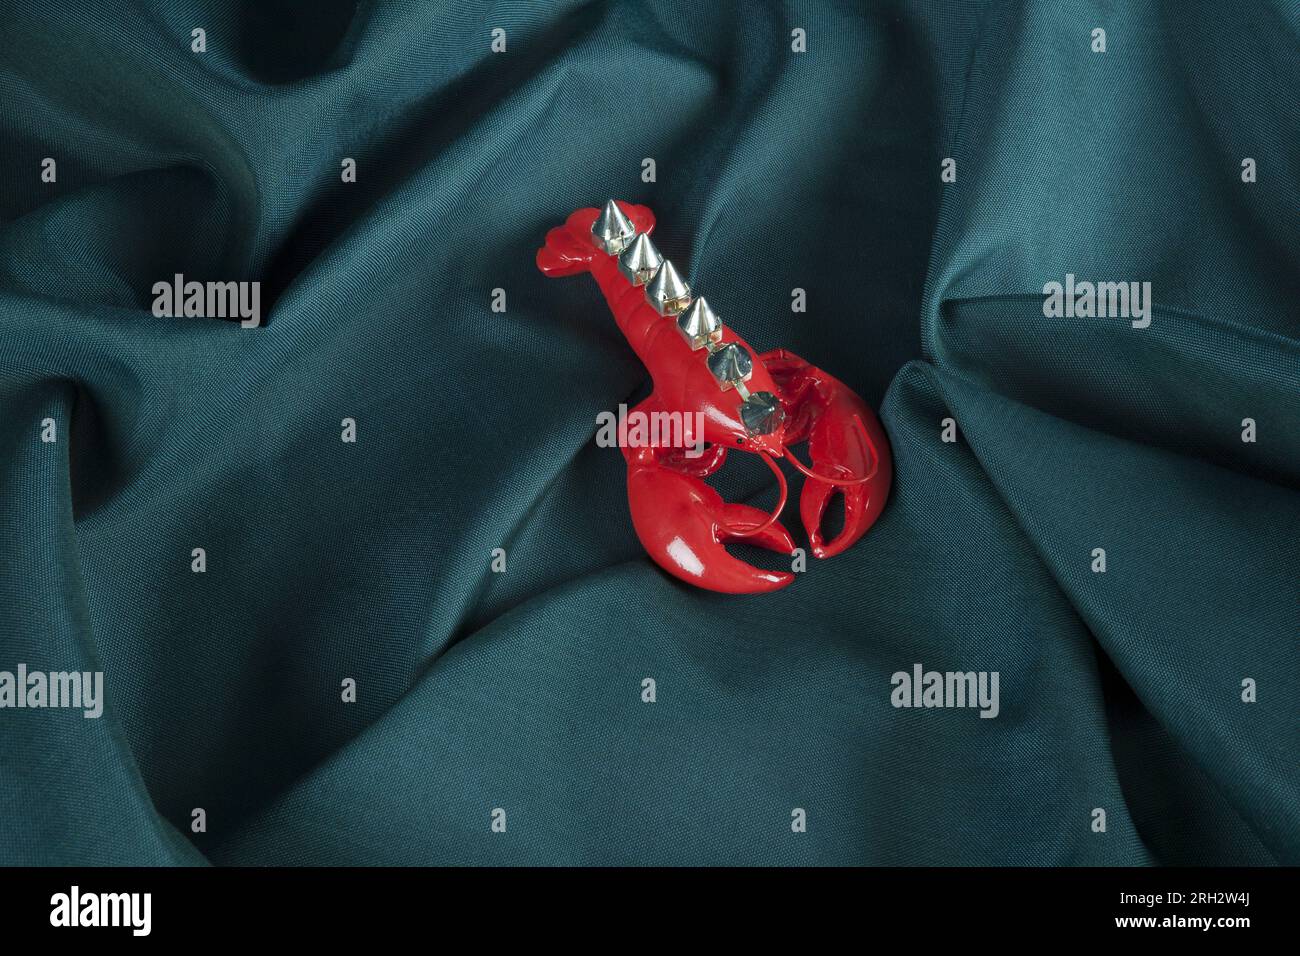 a punk style lobster wearing riveted spikes like a mohican on a green wavy fabric background. Minimal color still life photography. Stock Photo